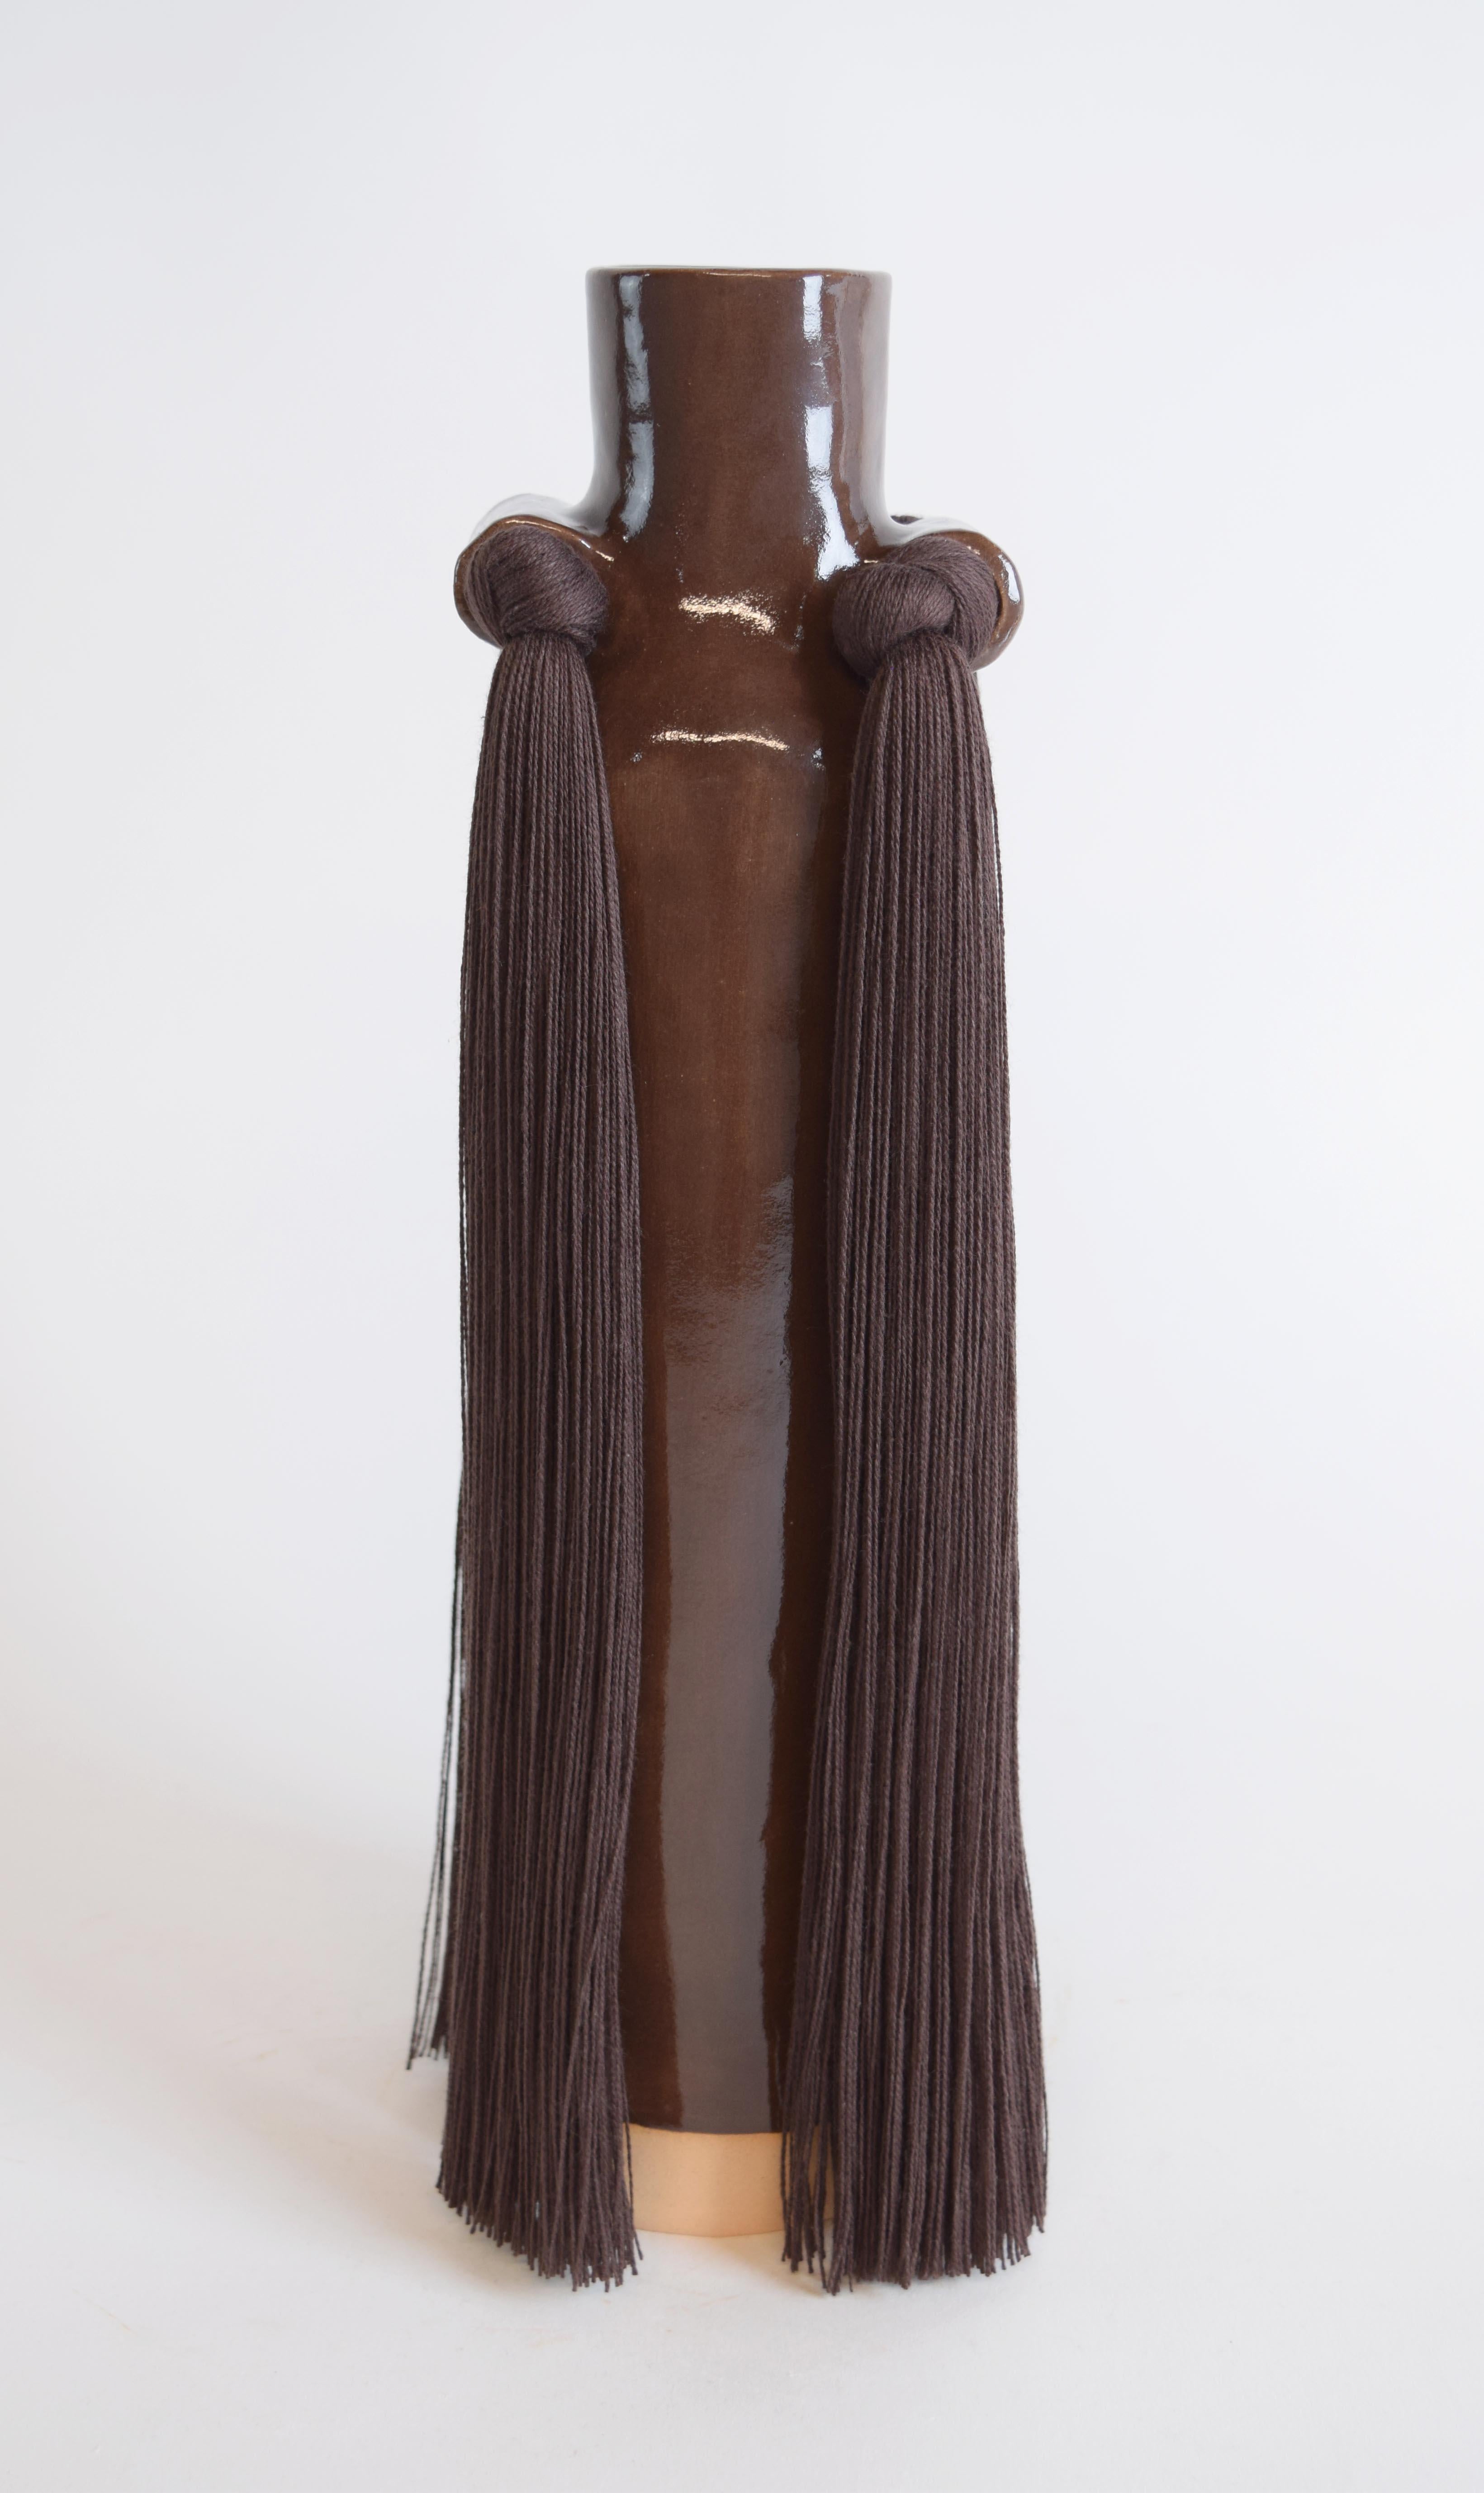 Vase #703 by Karen Gayle Tinney

Drawing on signature details from other Standard Collection pieces, this vase is an update to a traditional bottle neck silhouette.

Hand formed beige stoneware with brown glaze. Dark brown cotton fringe detail.